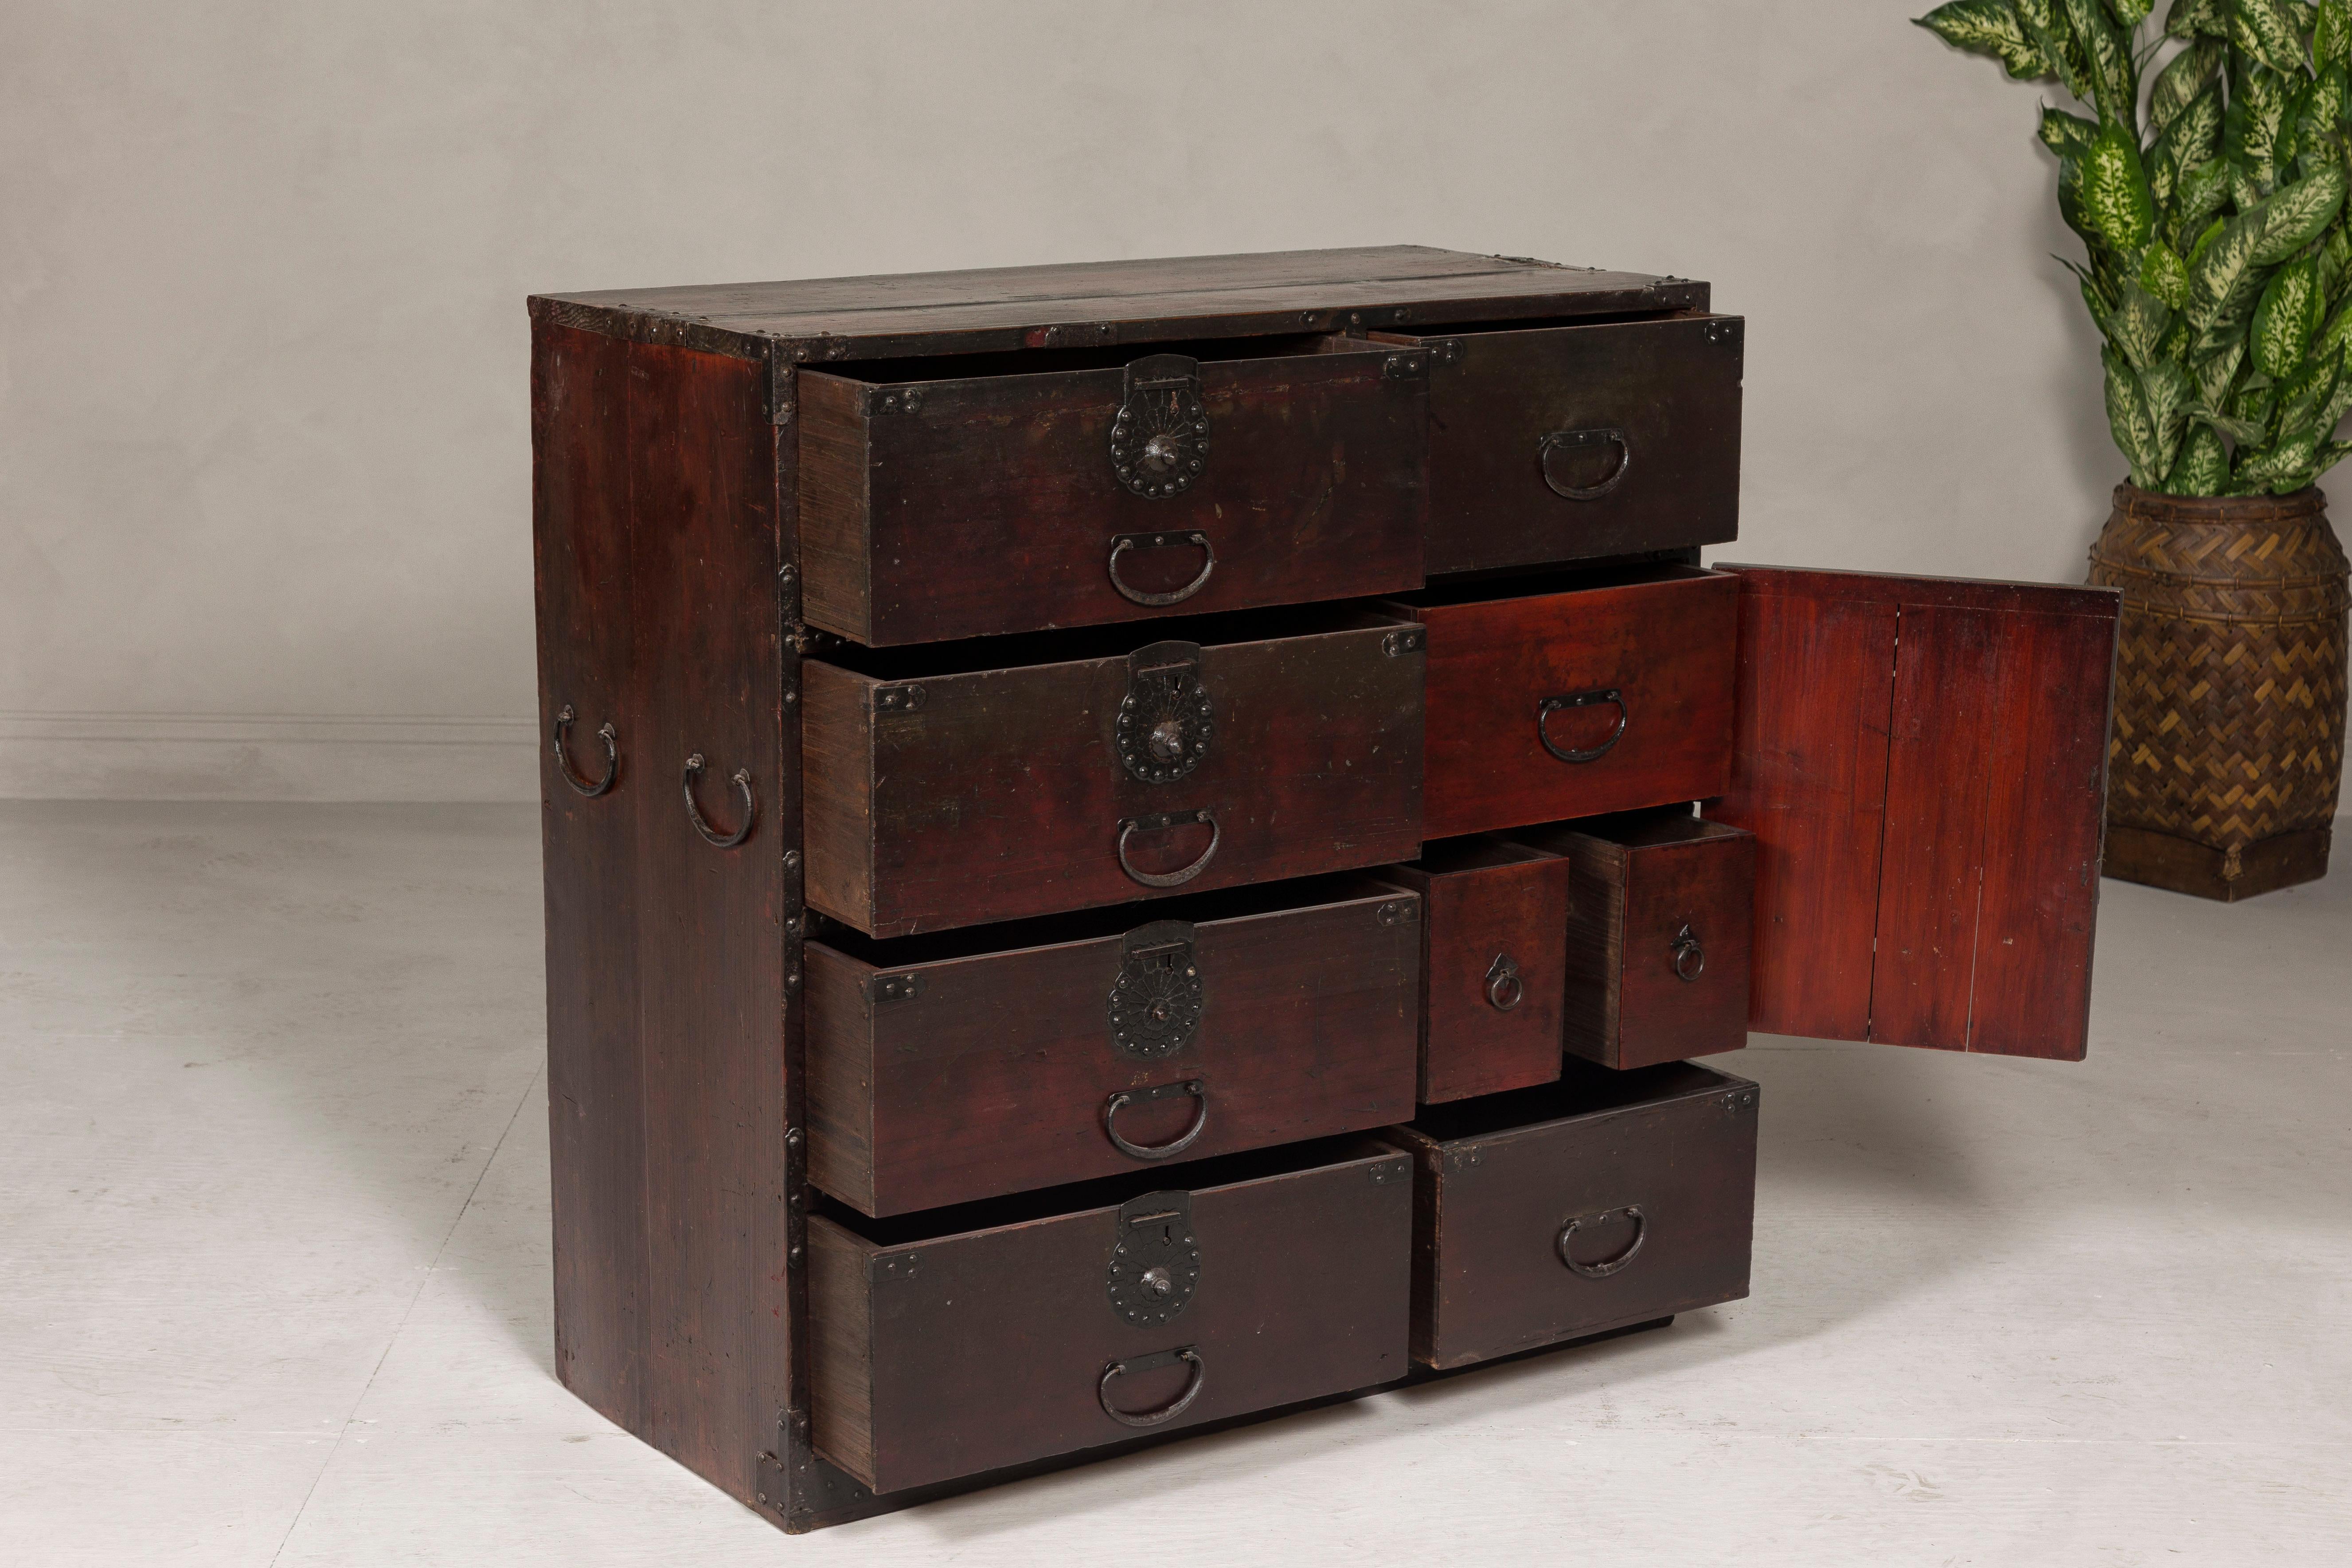 Japanese Meiji Period 19th Century Sendai Type Tansu Chest with Drawers and Safe For Sale 9